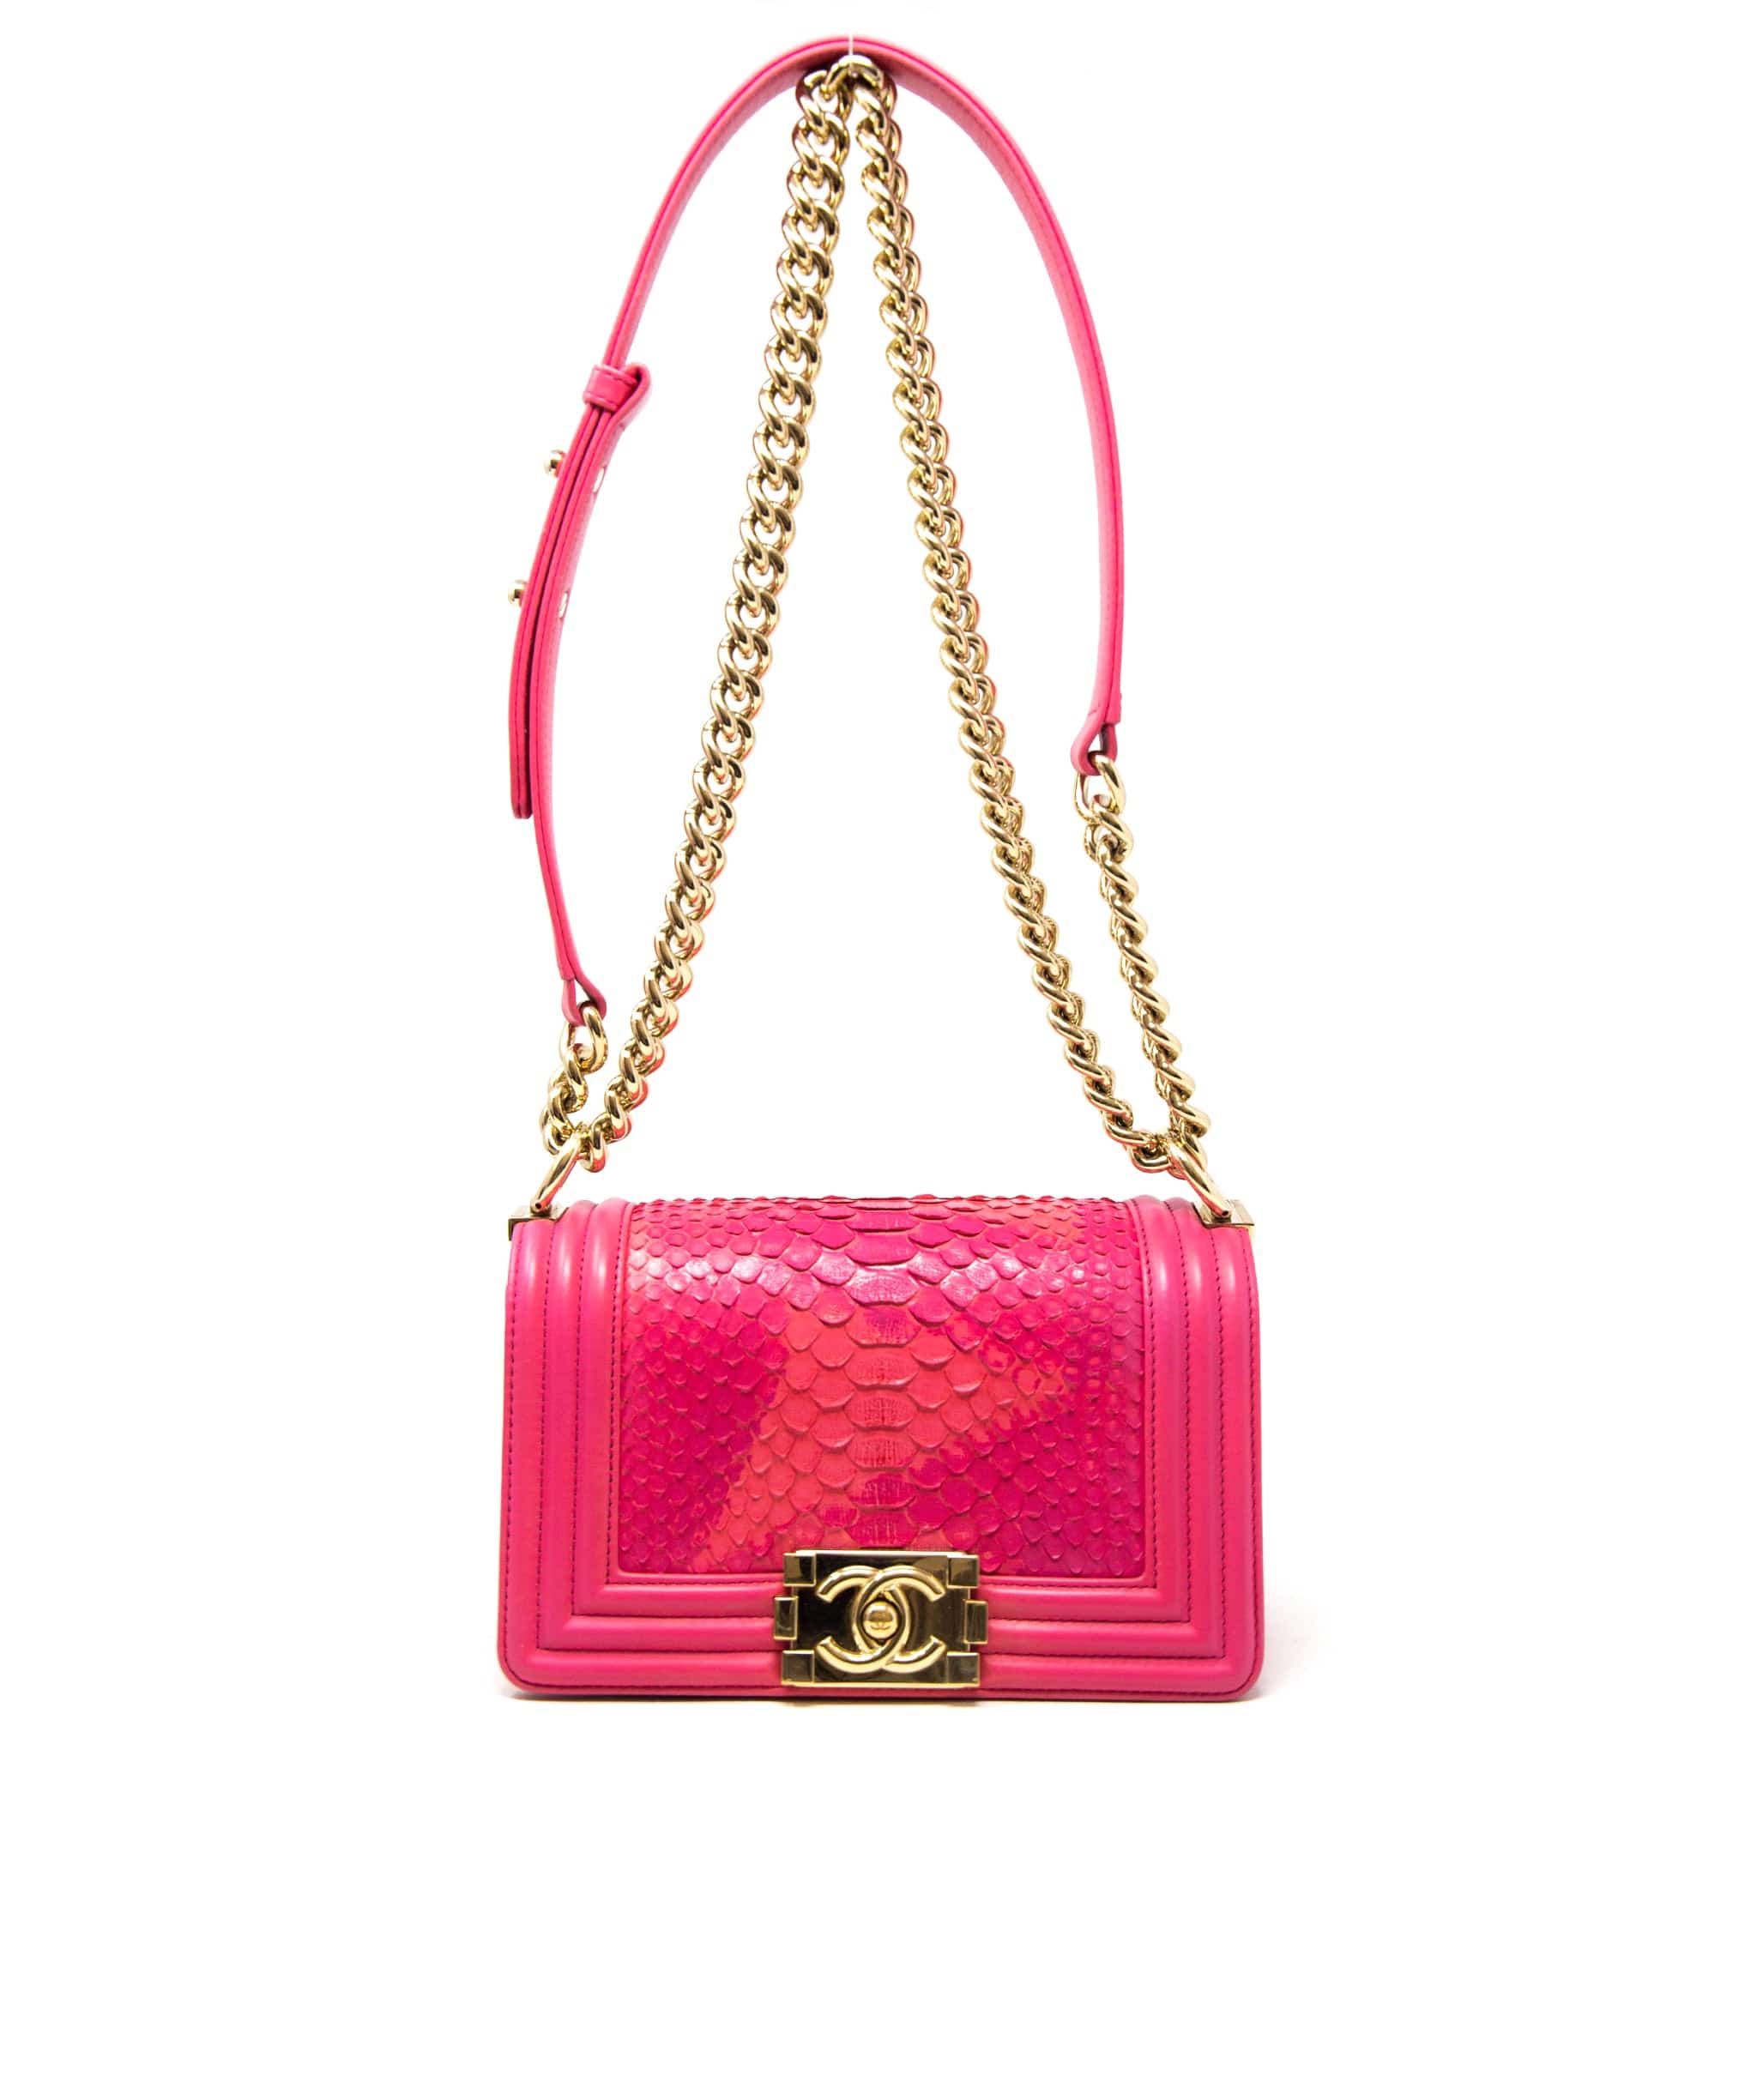 Chanel hot pink python boy bag, with champagne gold hardware - AGC1163 –  LuxuryPromise